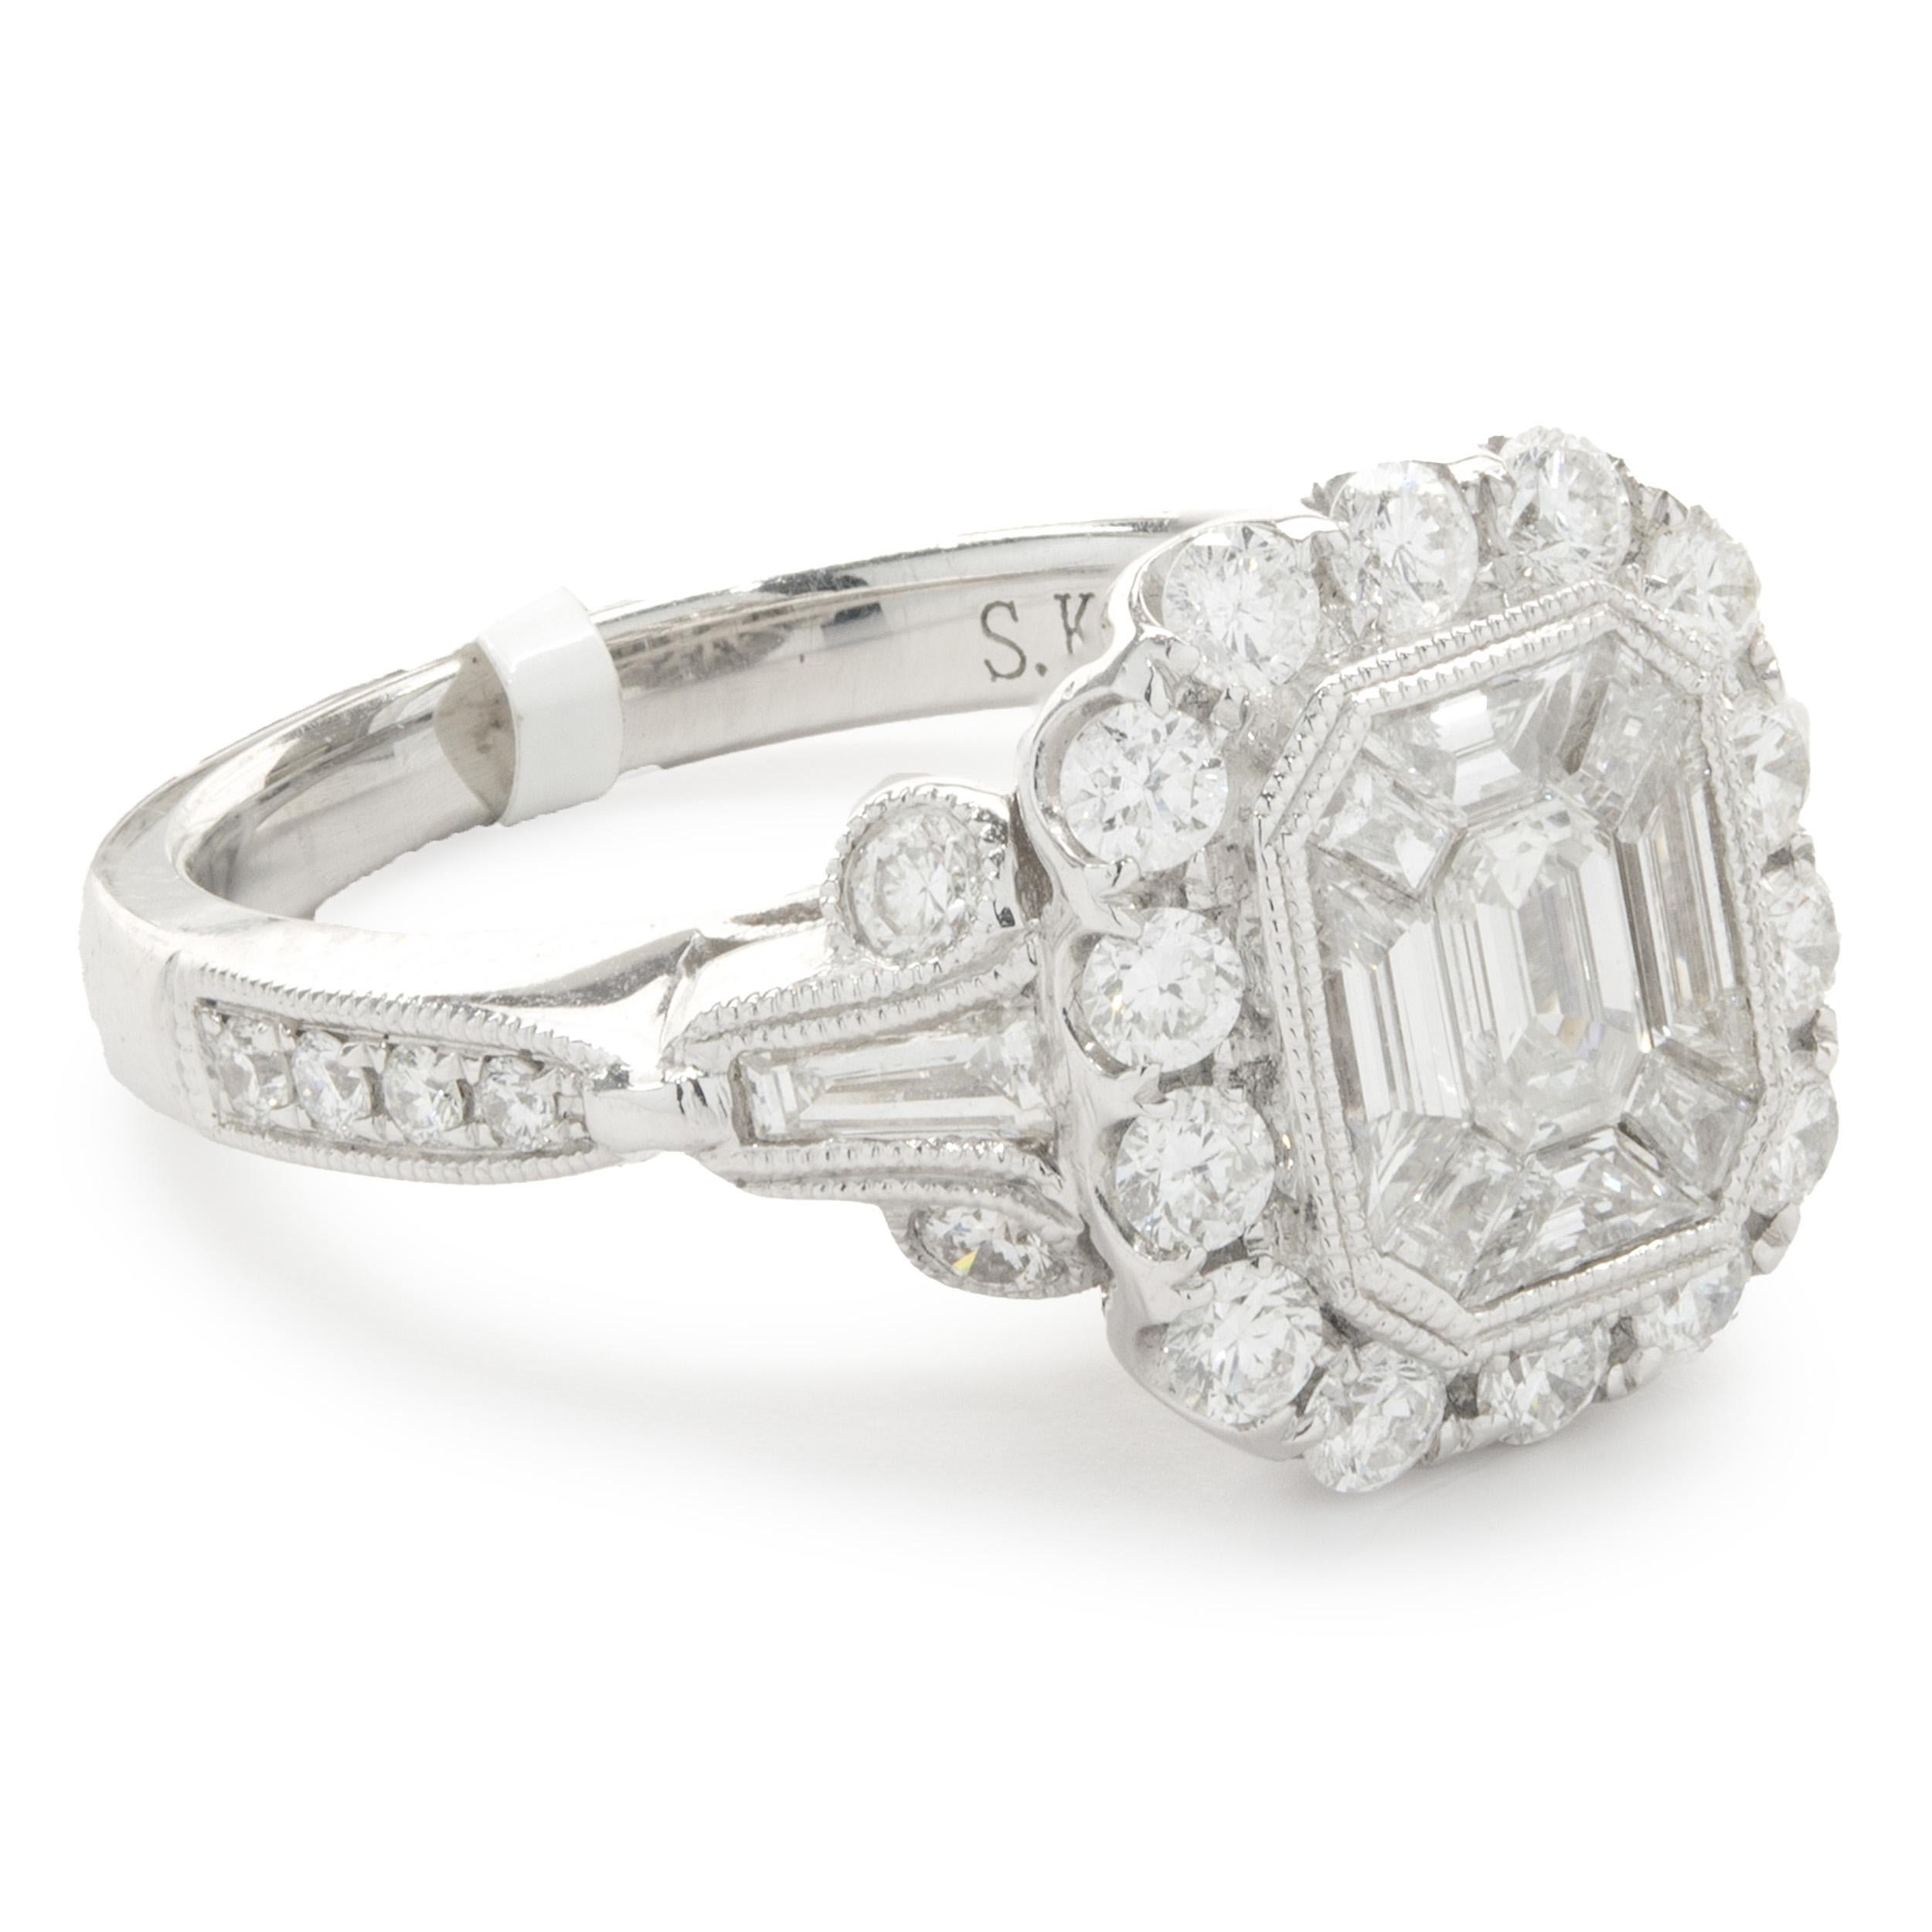 Designer: custom
Material: 14K white gold
Diamond: round, baguette, and emerald cut = 1.22cttw
Color: G
Clarity: VS2
Ring size: 6.5 (please allow two additional shipping days for sizing requests)
Weight:  5.68 grams